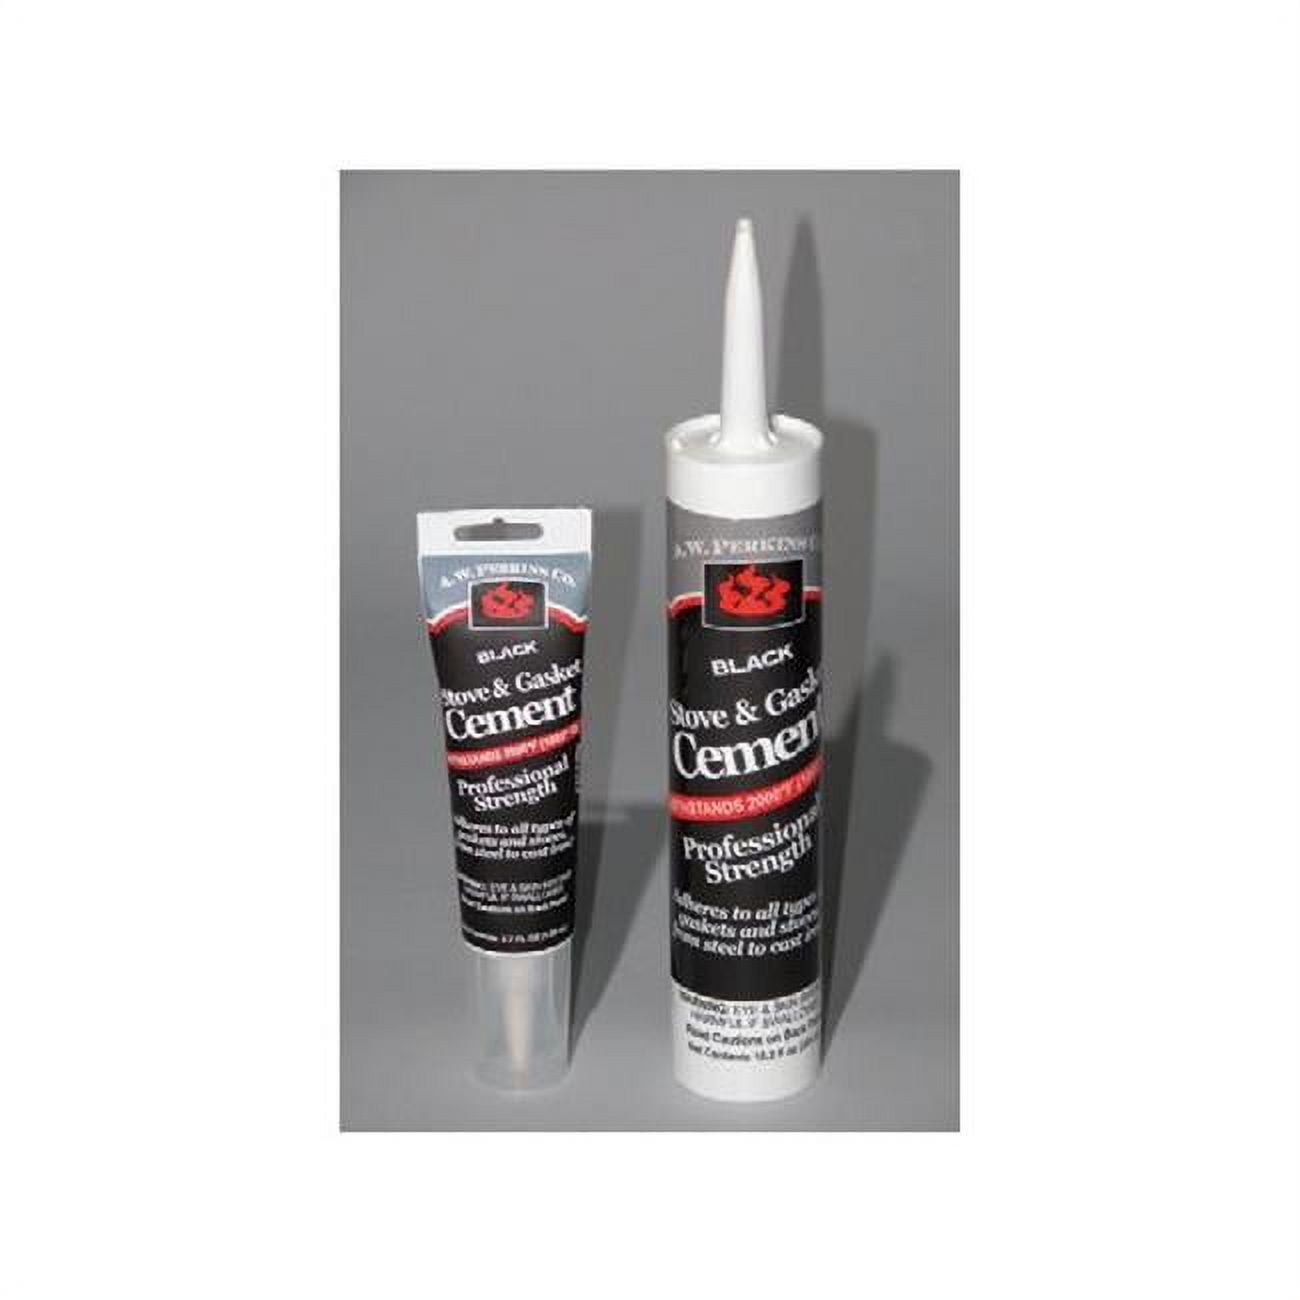 Picture of A.W. Perkins 2479243 11 oz Stove & Gasket Cement Tube Caulking Cartridge, Black